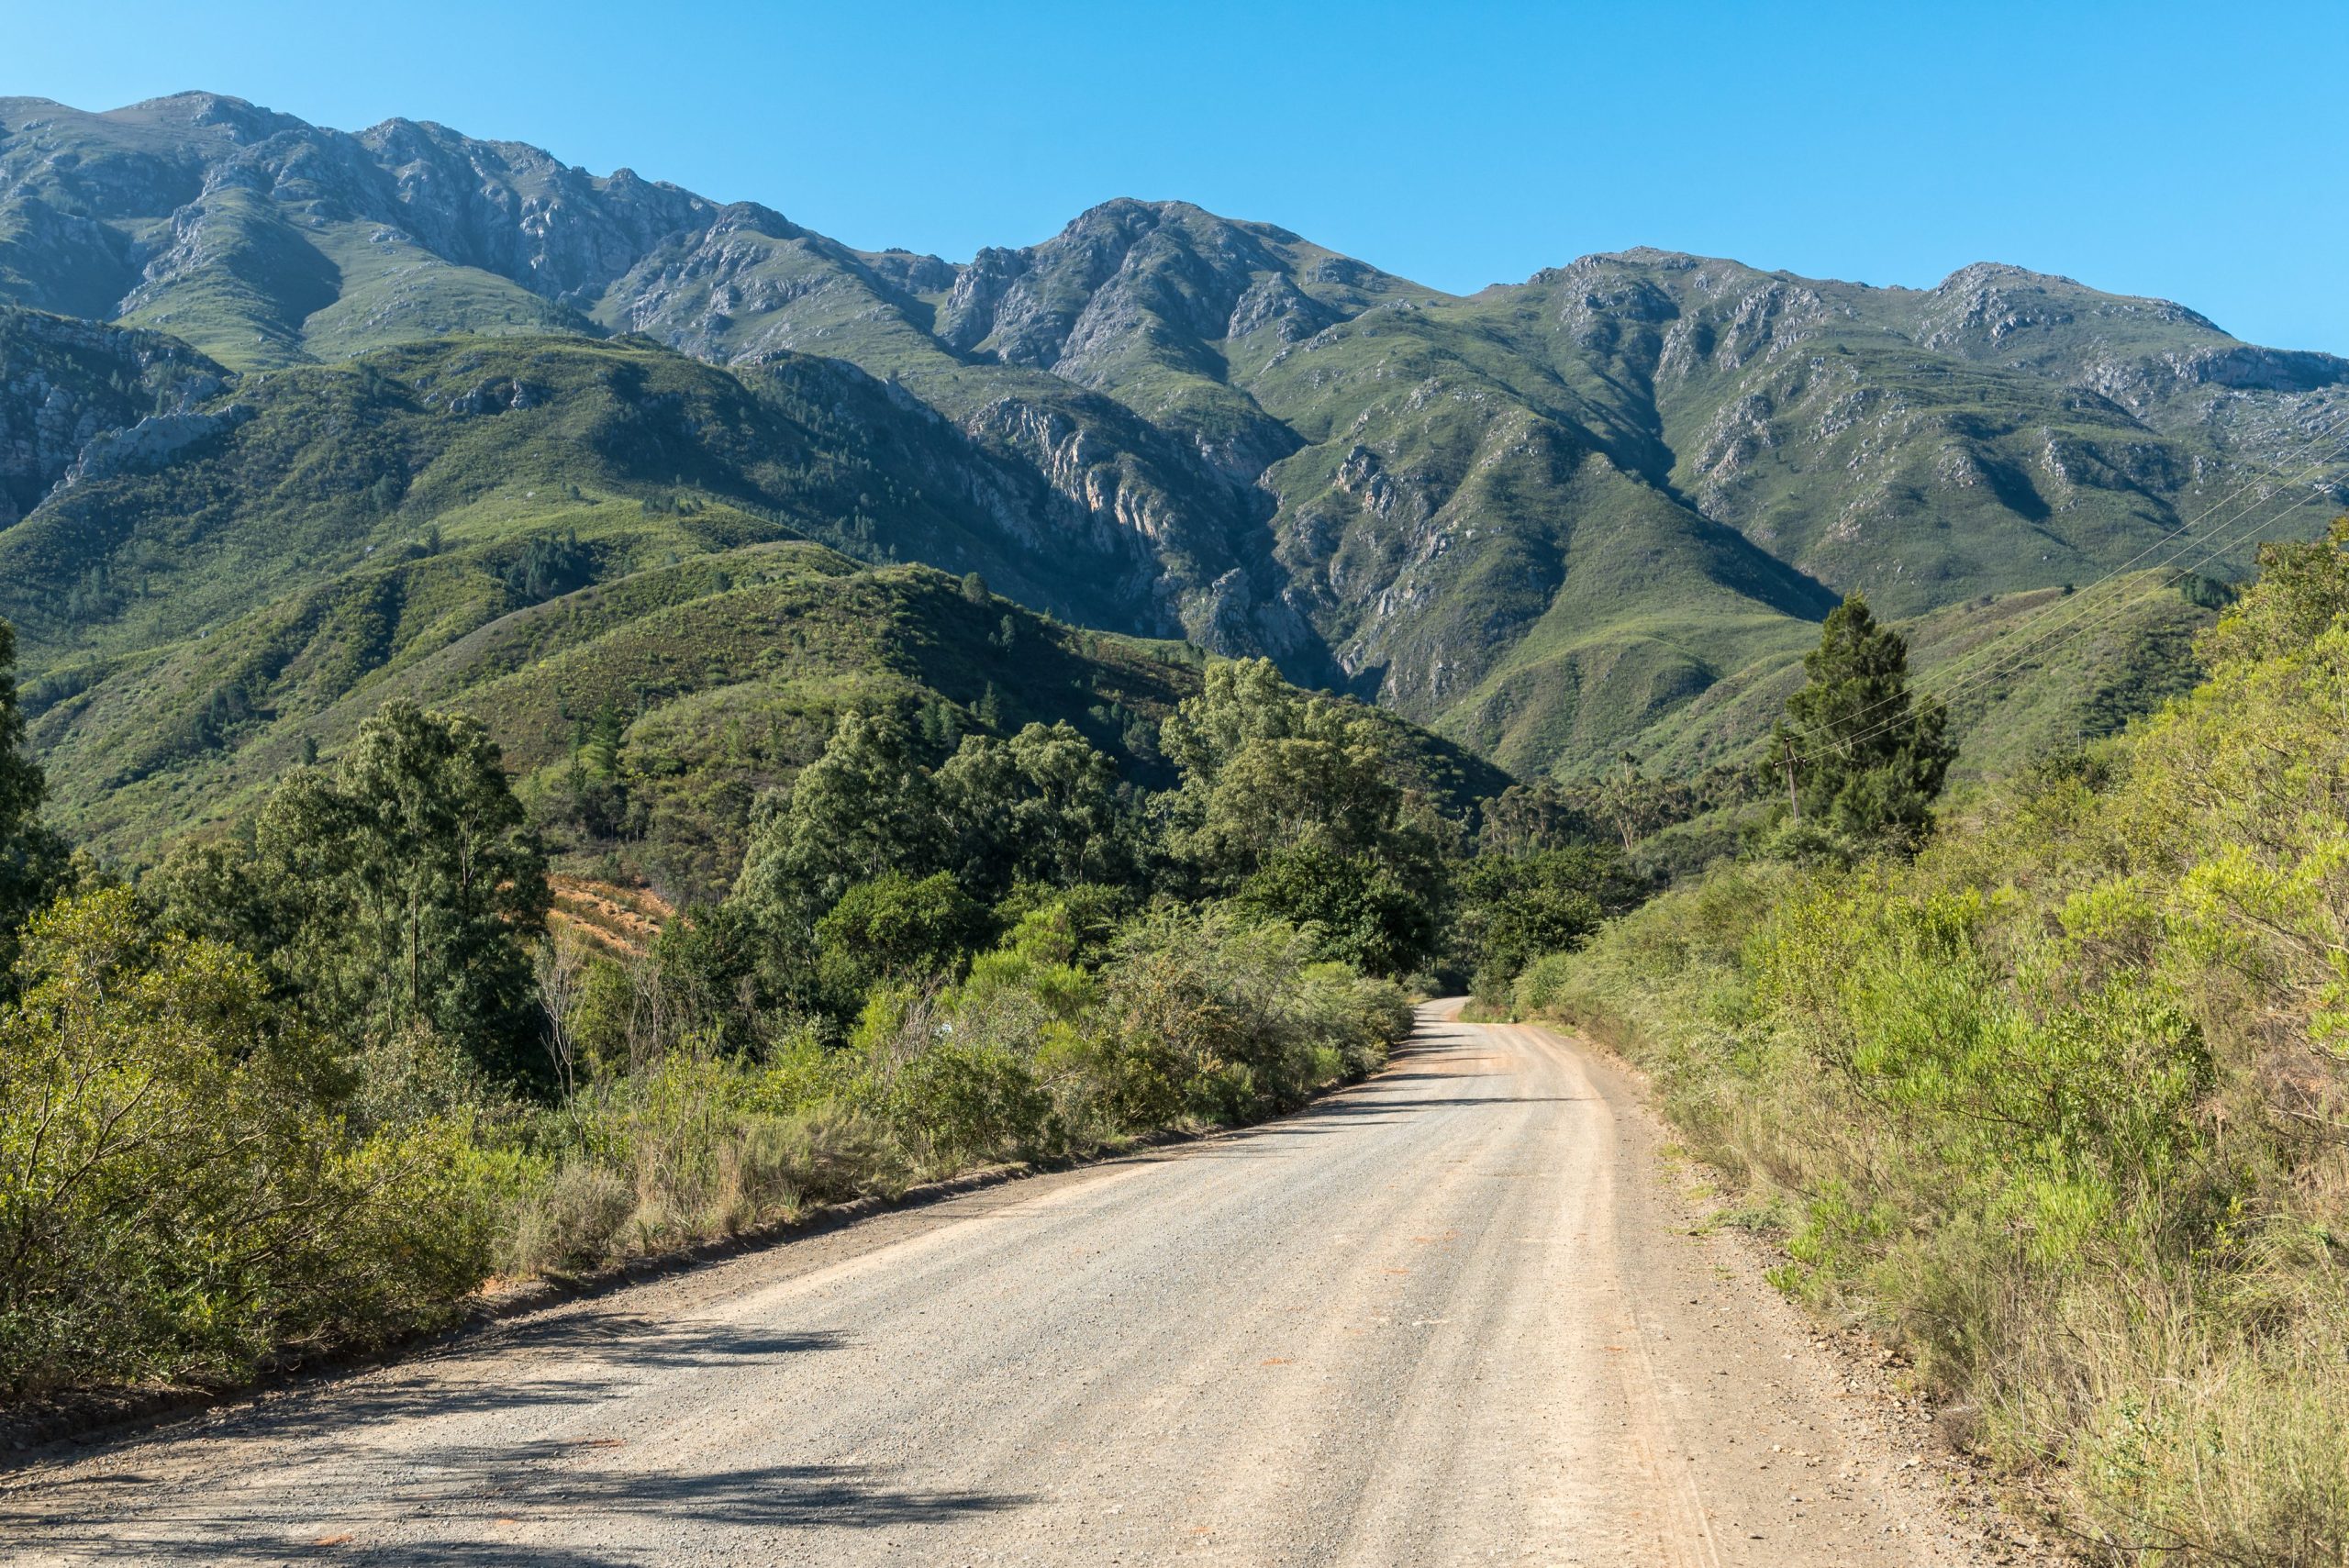 Road view of the breathtaking mountains in Robertson